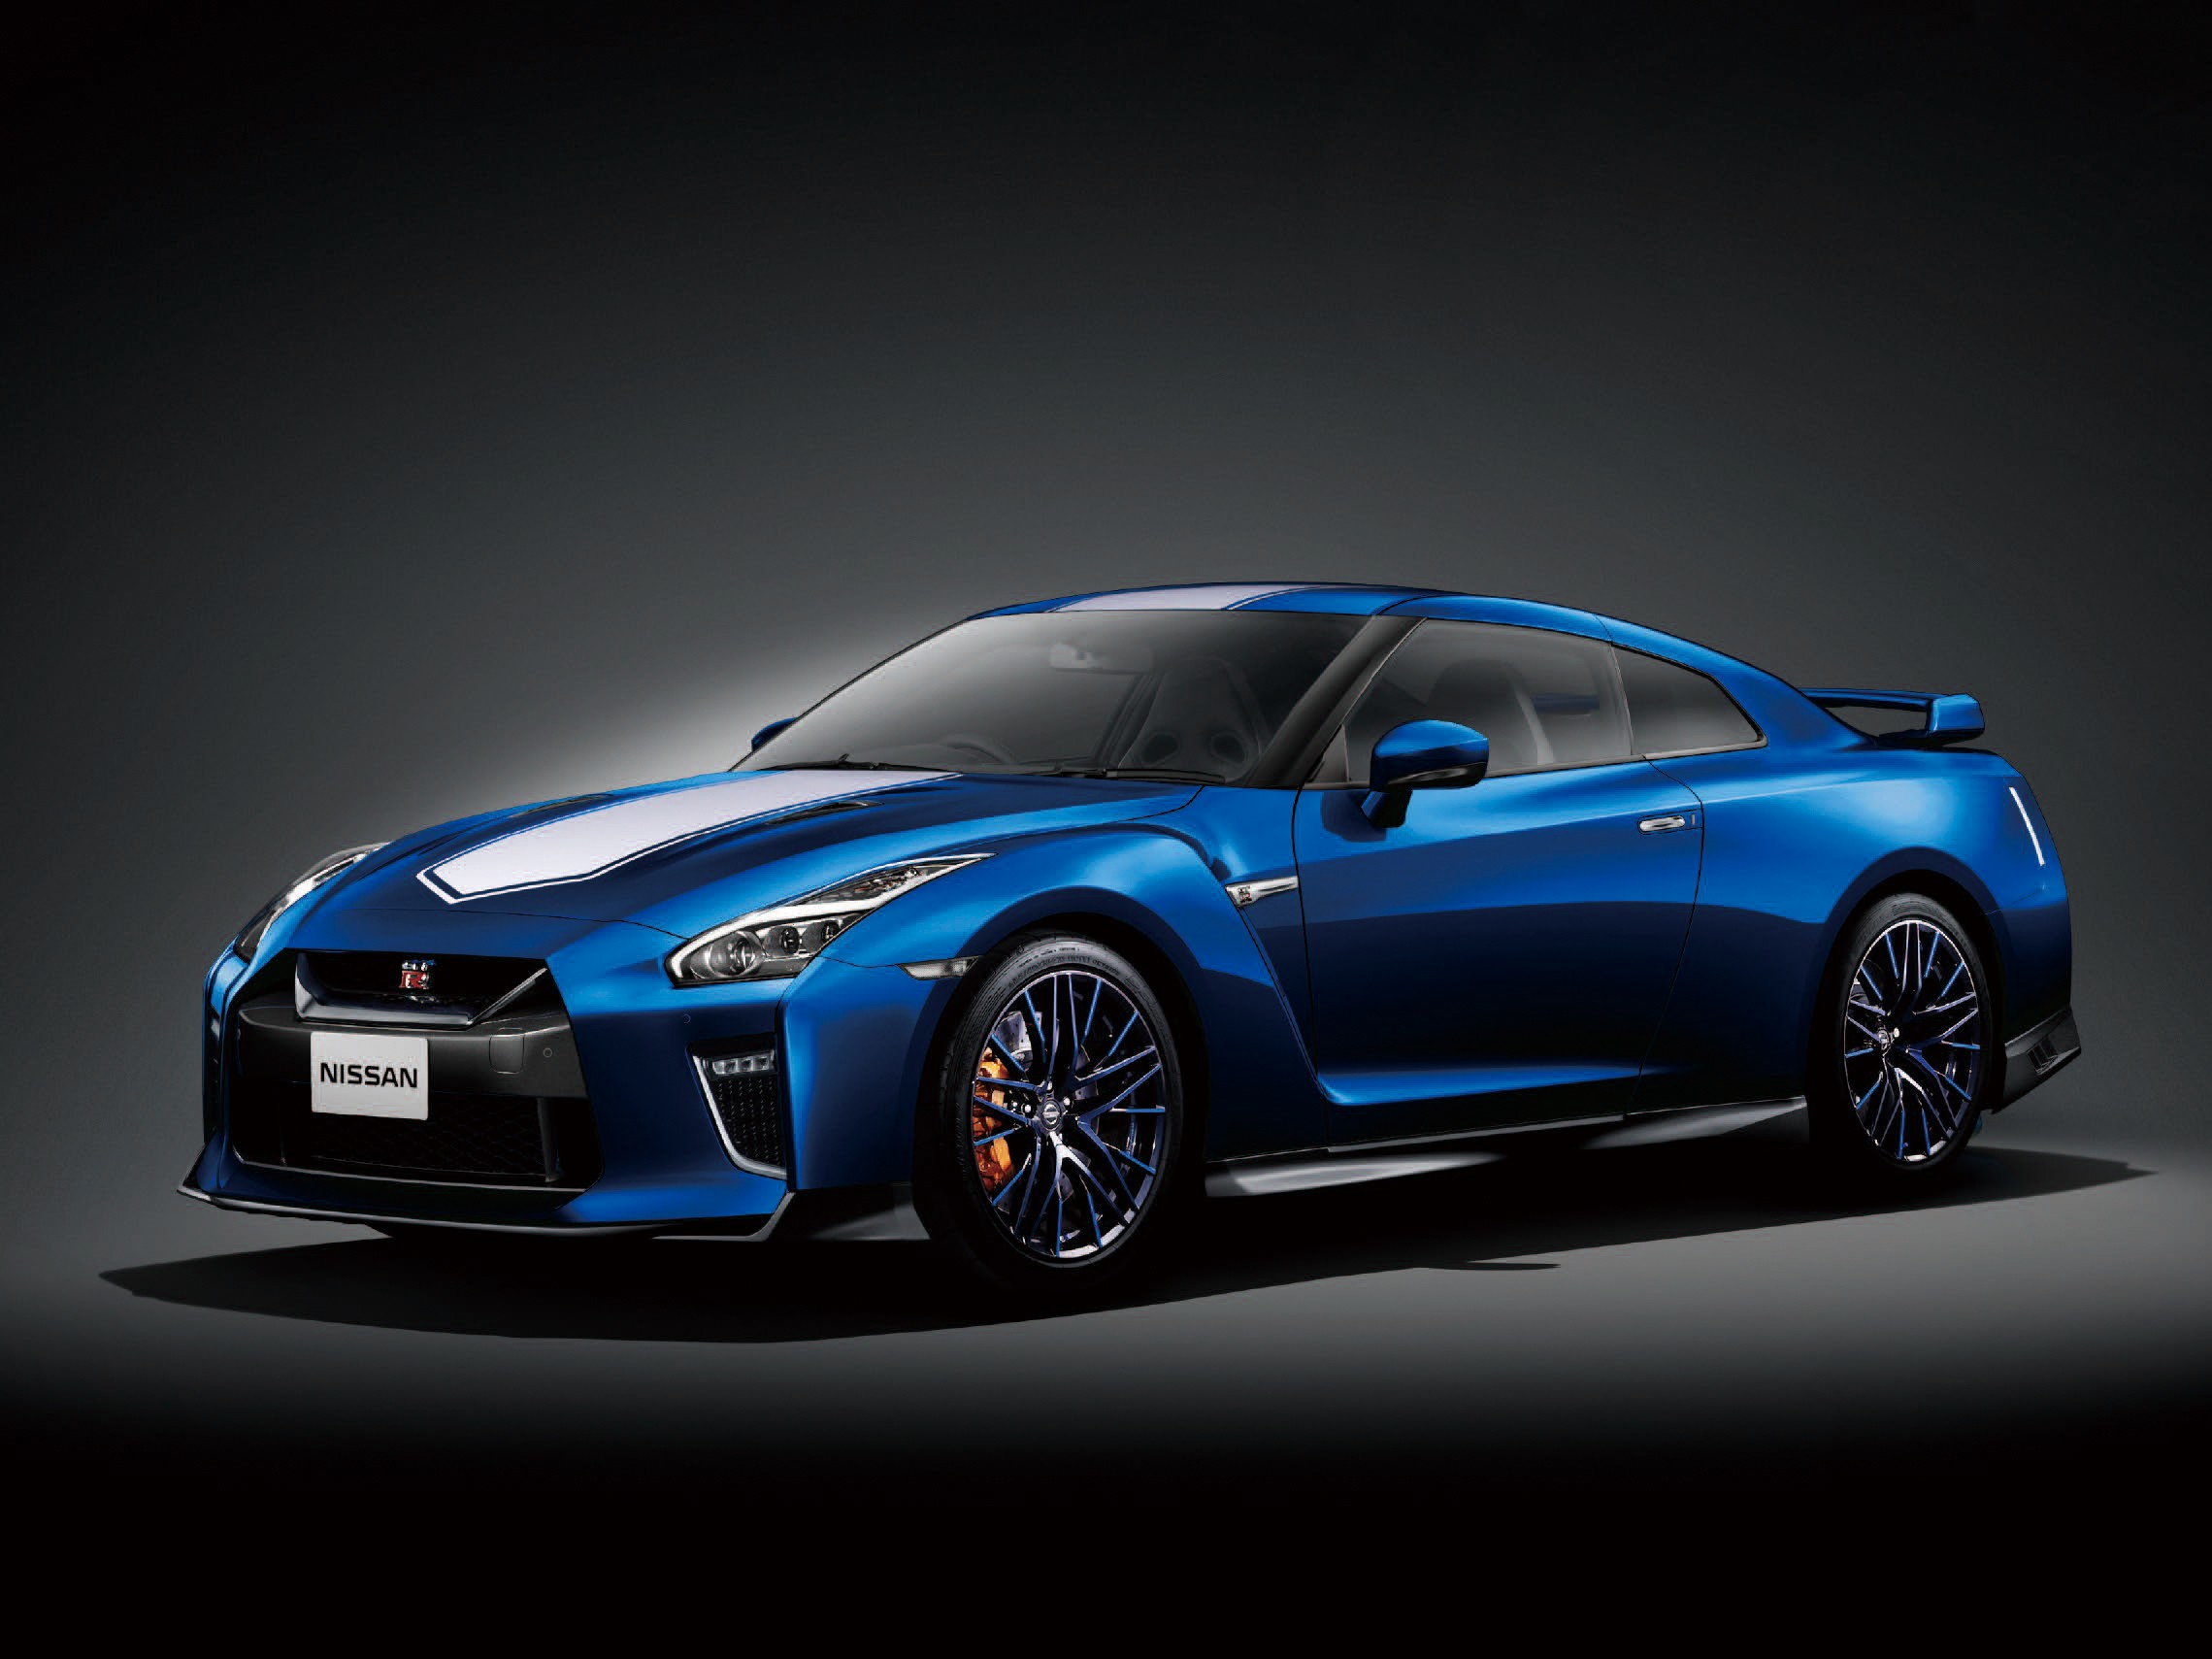 20 years of Spring Drive and 50 years of the NISSAN GT-R are